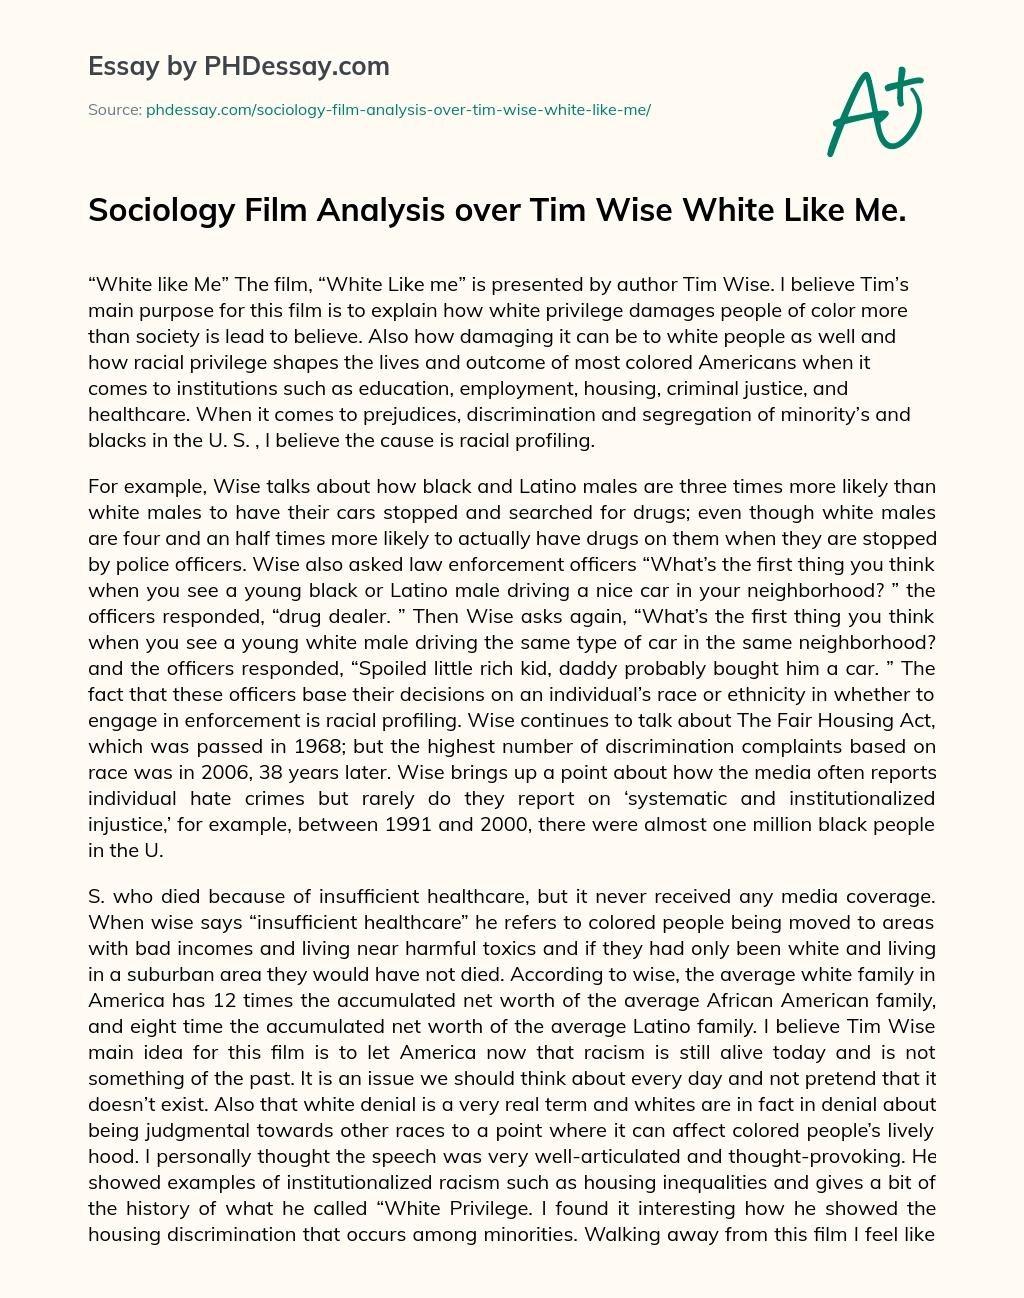 Sociology Film Analysis over Tim Wise White Like Me. essay